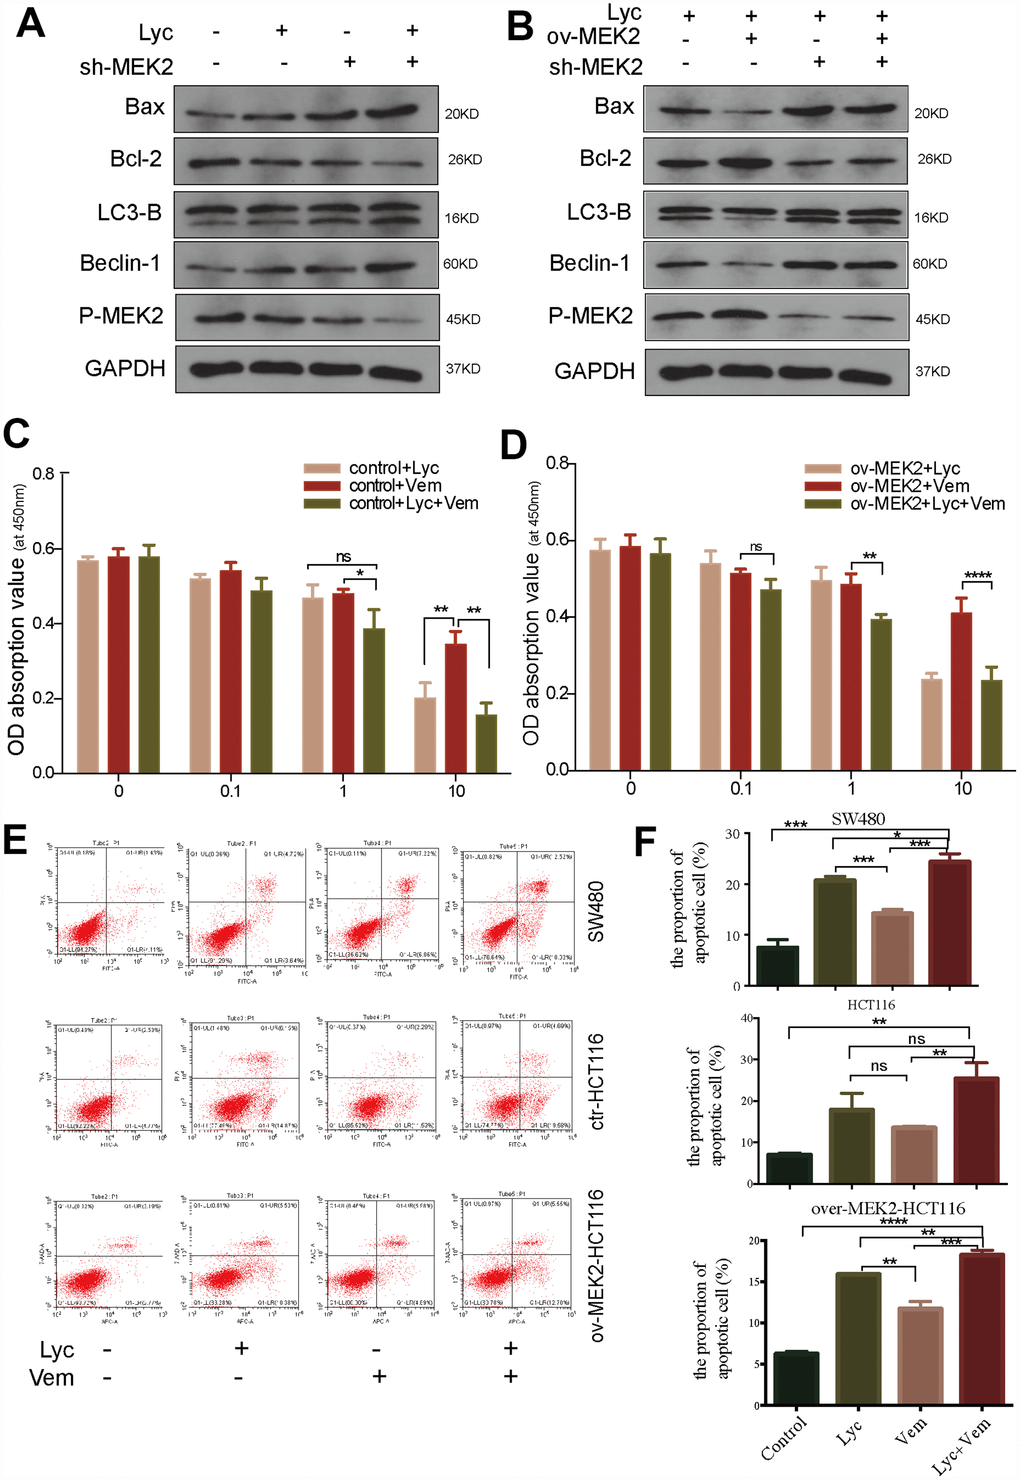 Lycorine enhances the anti-cancer effects of vemurafenib. (A) HCT116 cells transfected with blank shRNA or shMEK2 were treated with or without lycorine, and western blotting was performed to investigate the changes in autophagy and apoptosis. GAPDH was used as a loading control. (B) Mitogen-activated protein kinase kinase 2 (MEK2) was depleted in MEK2-overexpressing HCT116 cells by exposure to lycorine, and western blotting was used to investigate the levels of autophagy and apoptosis. GAPDH was used as a loading control. (C–D) The viability of HCT116 cells transfected with control or MEK2 vectors in response to different treatments (lycorine, vemurafenib, lycorine plus vemurafenib) was detected using the Cell Counting Kit-8 assay. (E–F) SW480, HCT116, and MEK2-overexpressing cells were treated with lycorine, vemurafenib, or lycorine + vemurafenib for 24 h and analyzed using annexin V/PI flow cytometry. The right lower quadrant indicates early apoptosis. Data are presented as the mean ± SD of three independent experiments (*p 